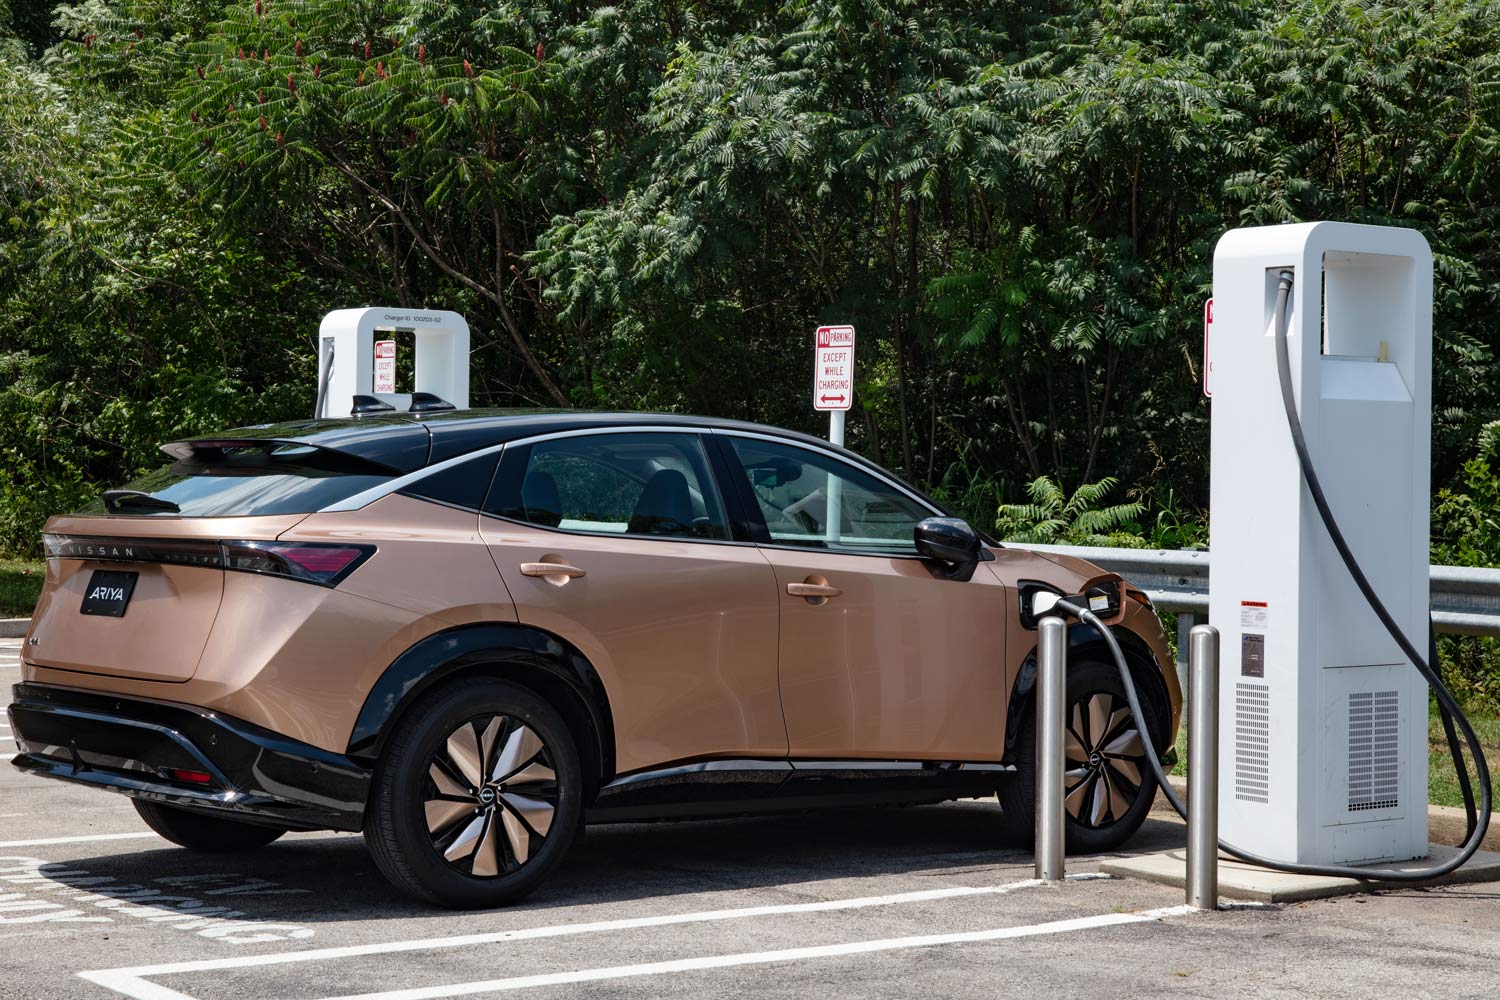 A bronze Nissan Ariya is parked at a charging station.